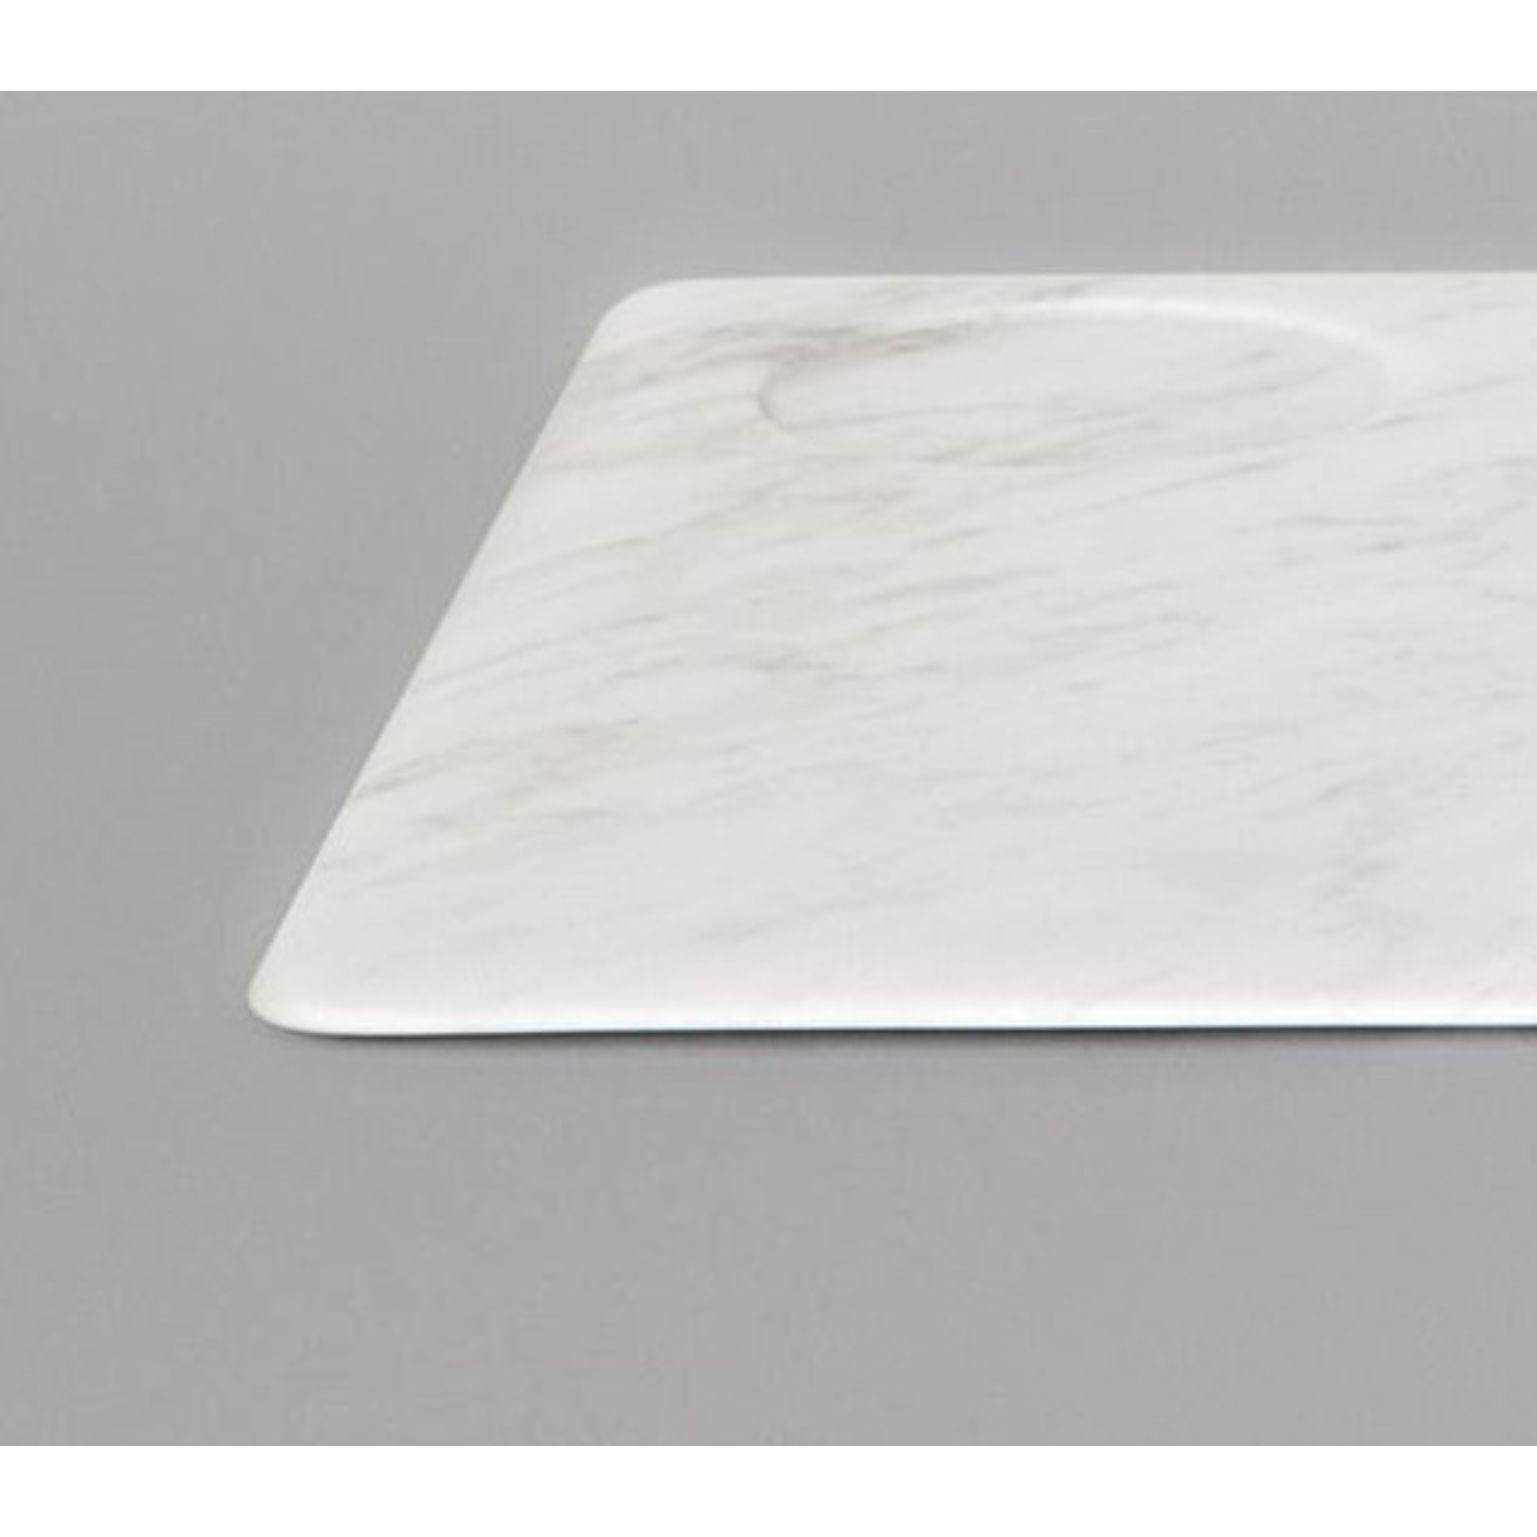 Tavoletta Serving tray by Studioformart
Total Marble Collection
Dimensions: 46 x 34 x 0.7 cm
Materials: Bianco Carrara 

The history of marble carving is lost in time; in one breath, it takes us back to the IV century BC, to ancient Greece